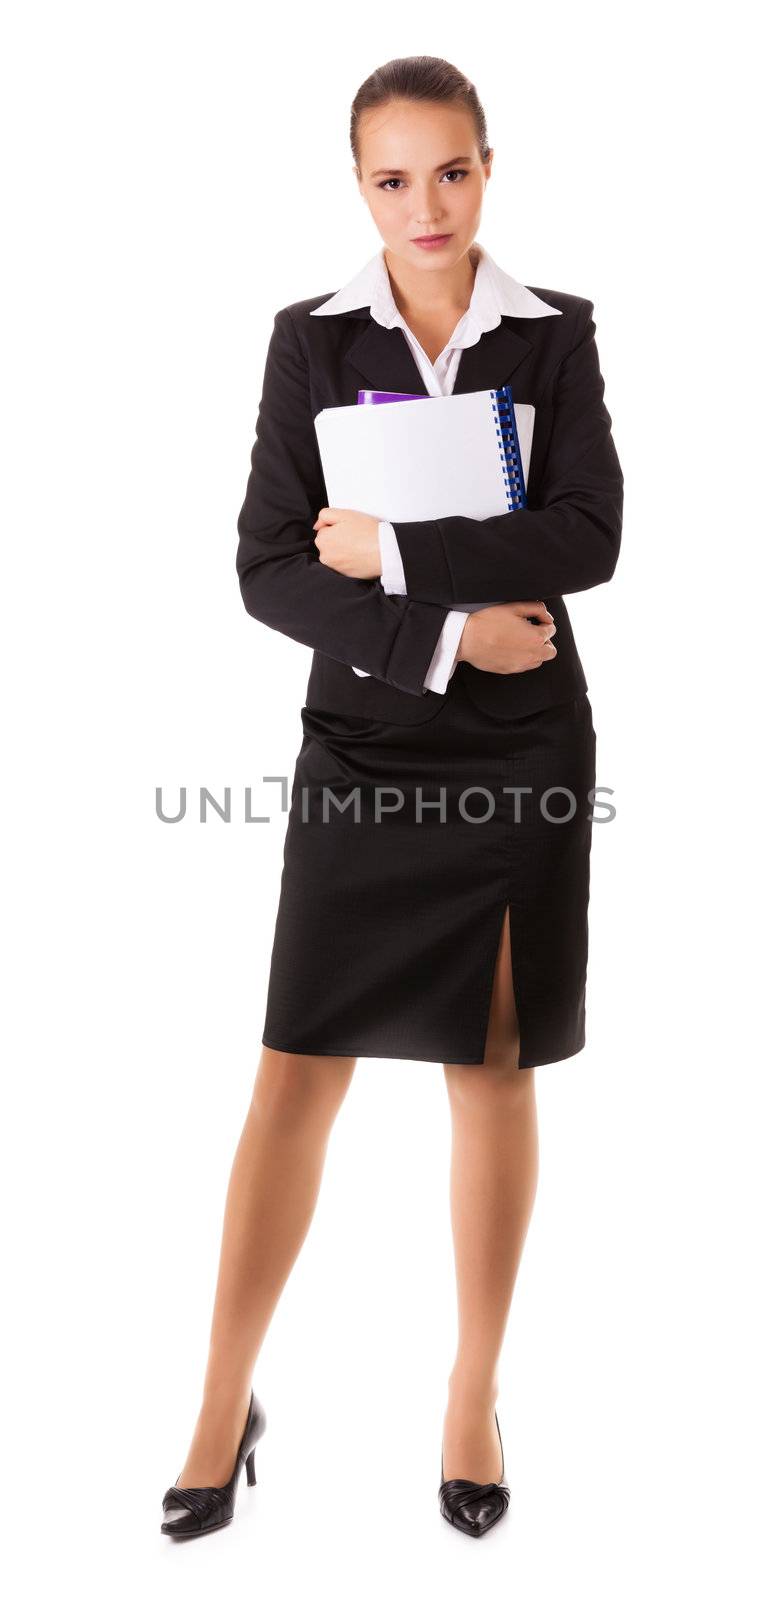 Business woman with files and books by iryna_rasko